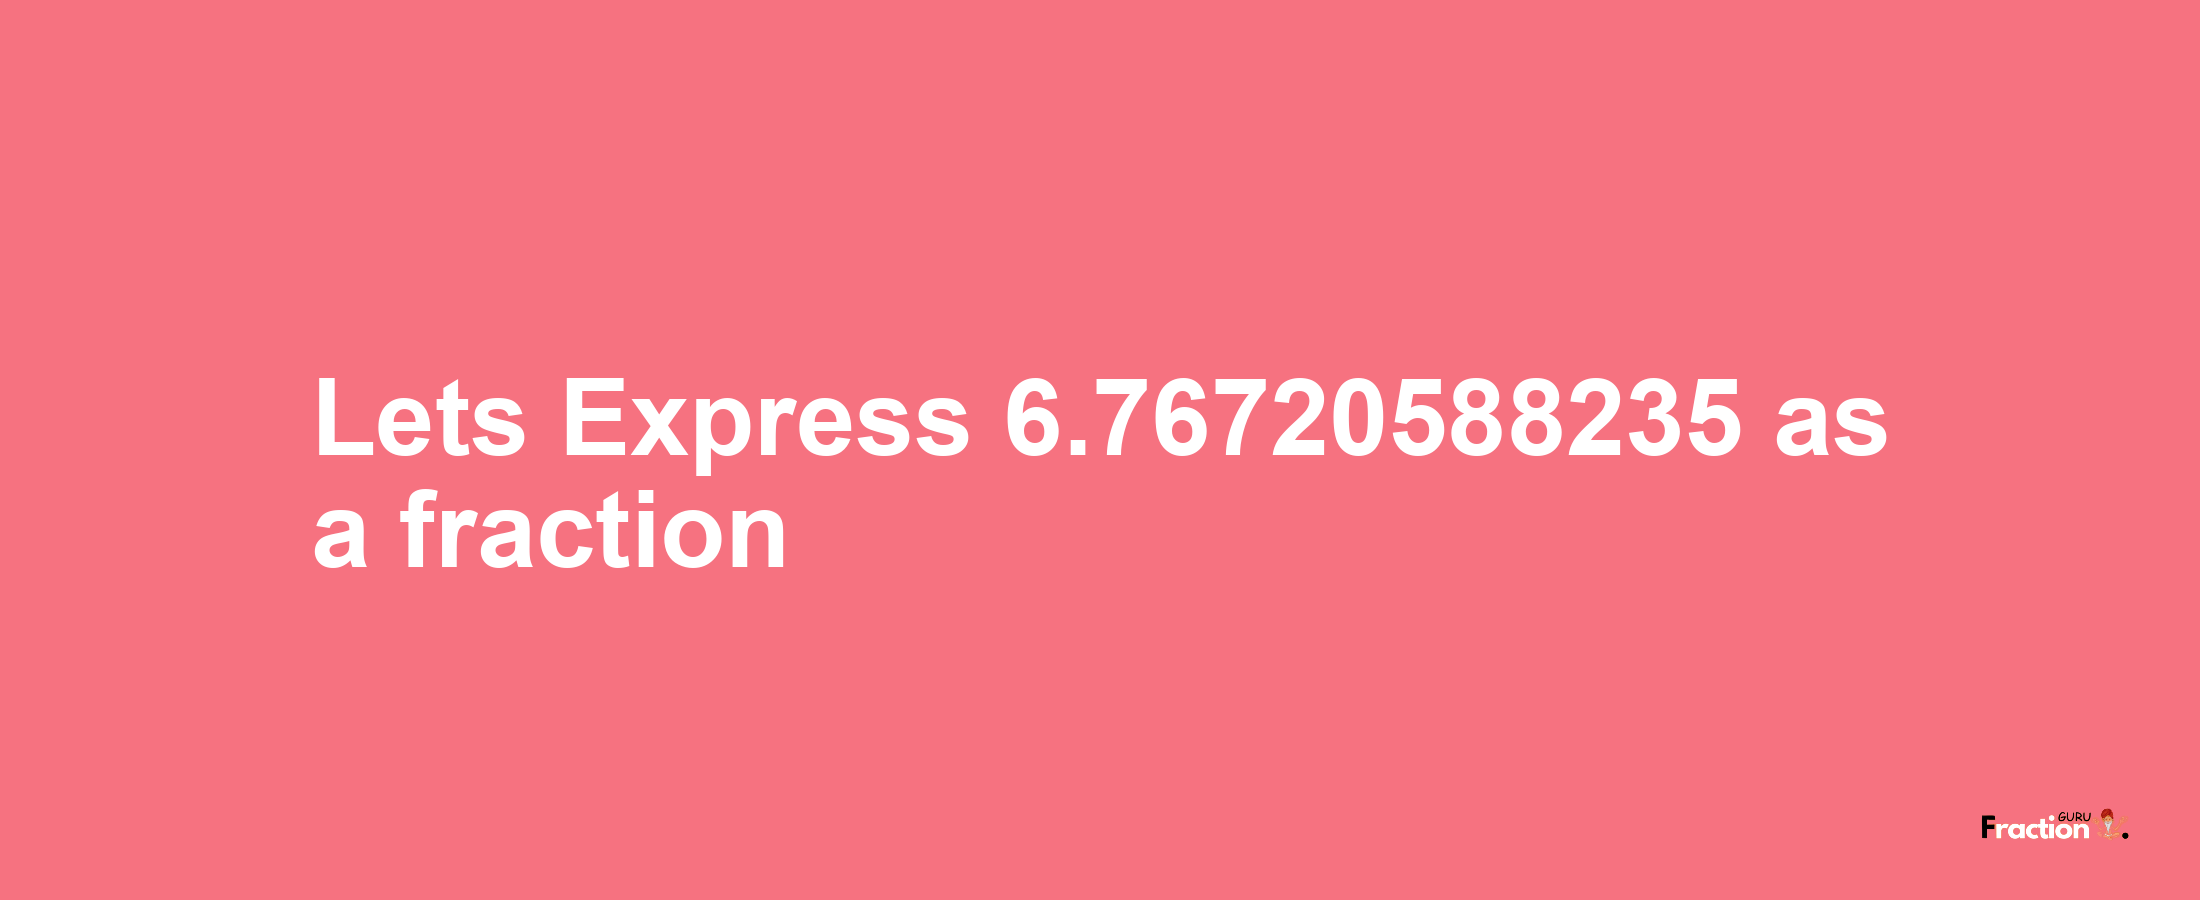 Lets Express 6.76720588235 as afraction